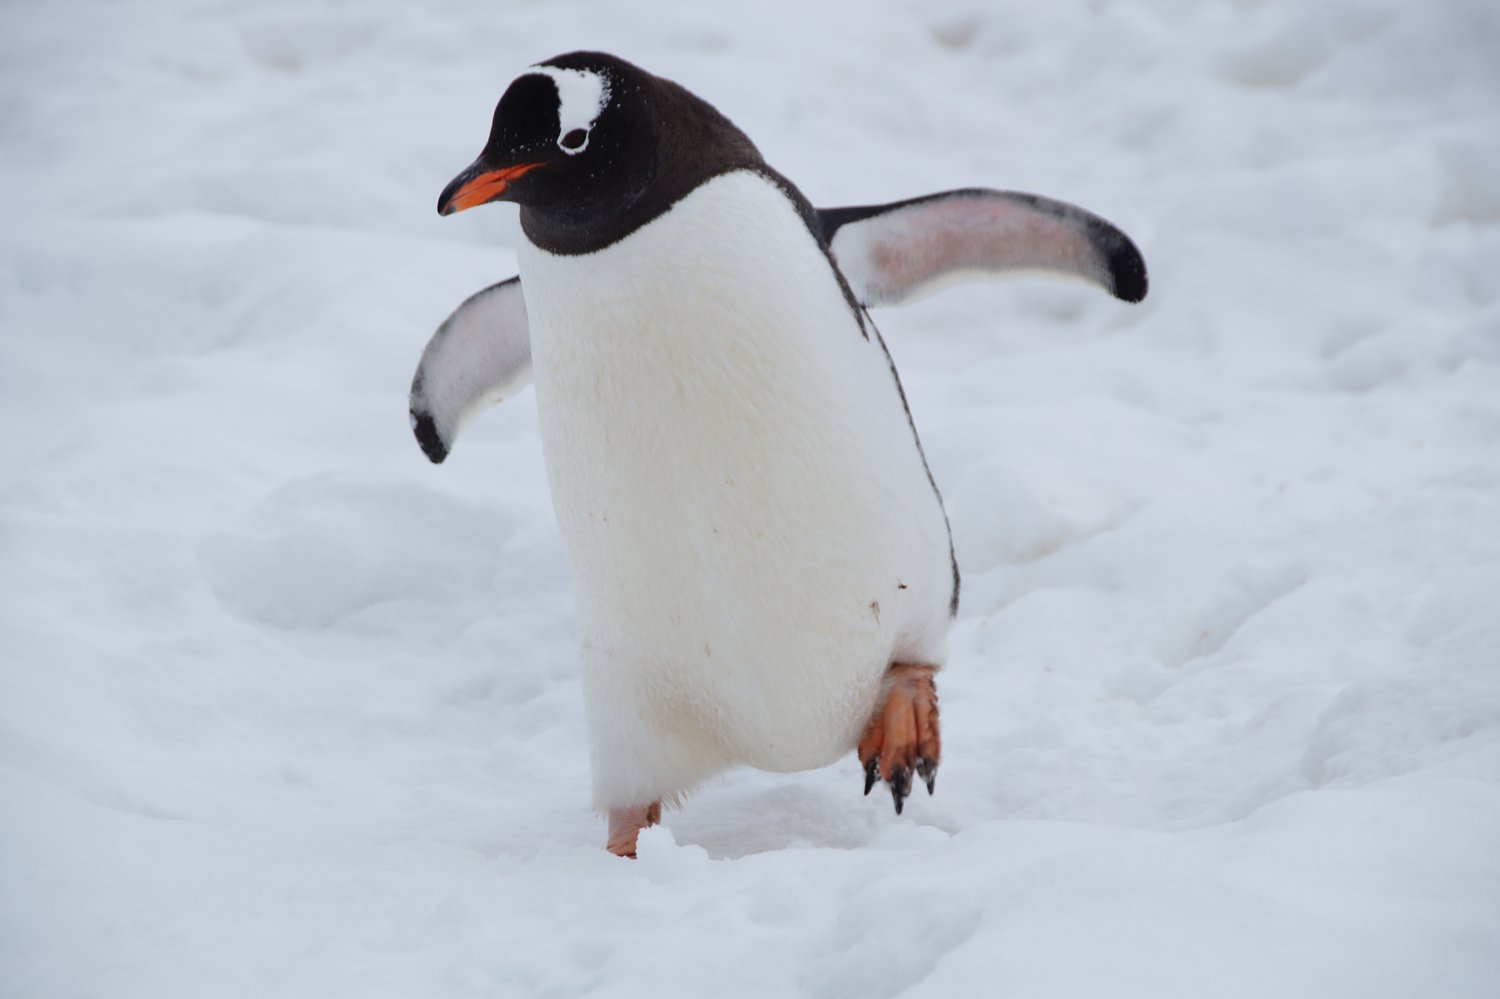 Stay safe on the ice by walking like your inner penguin.